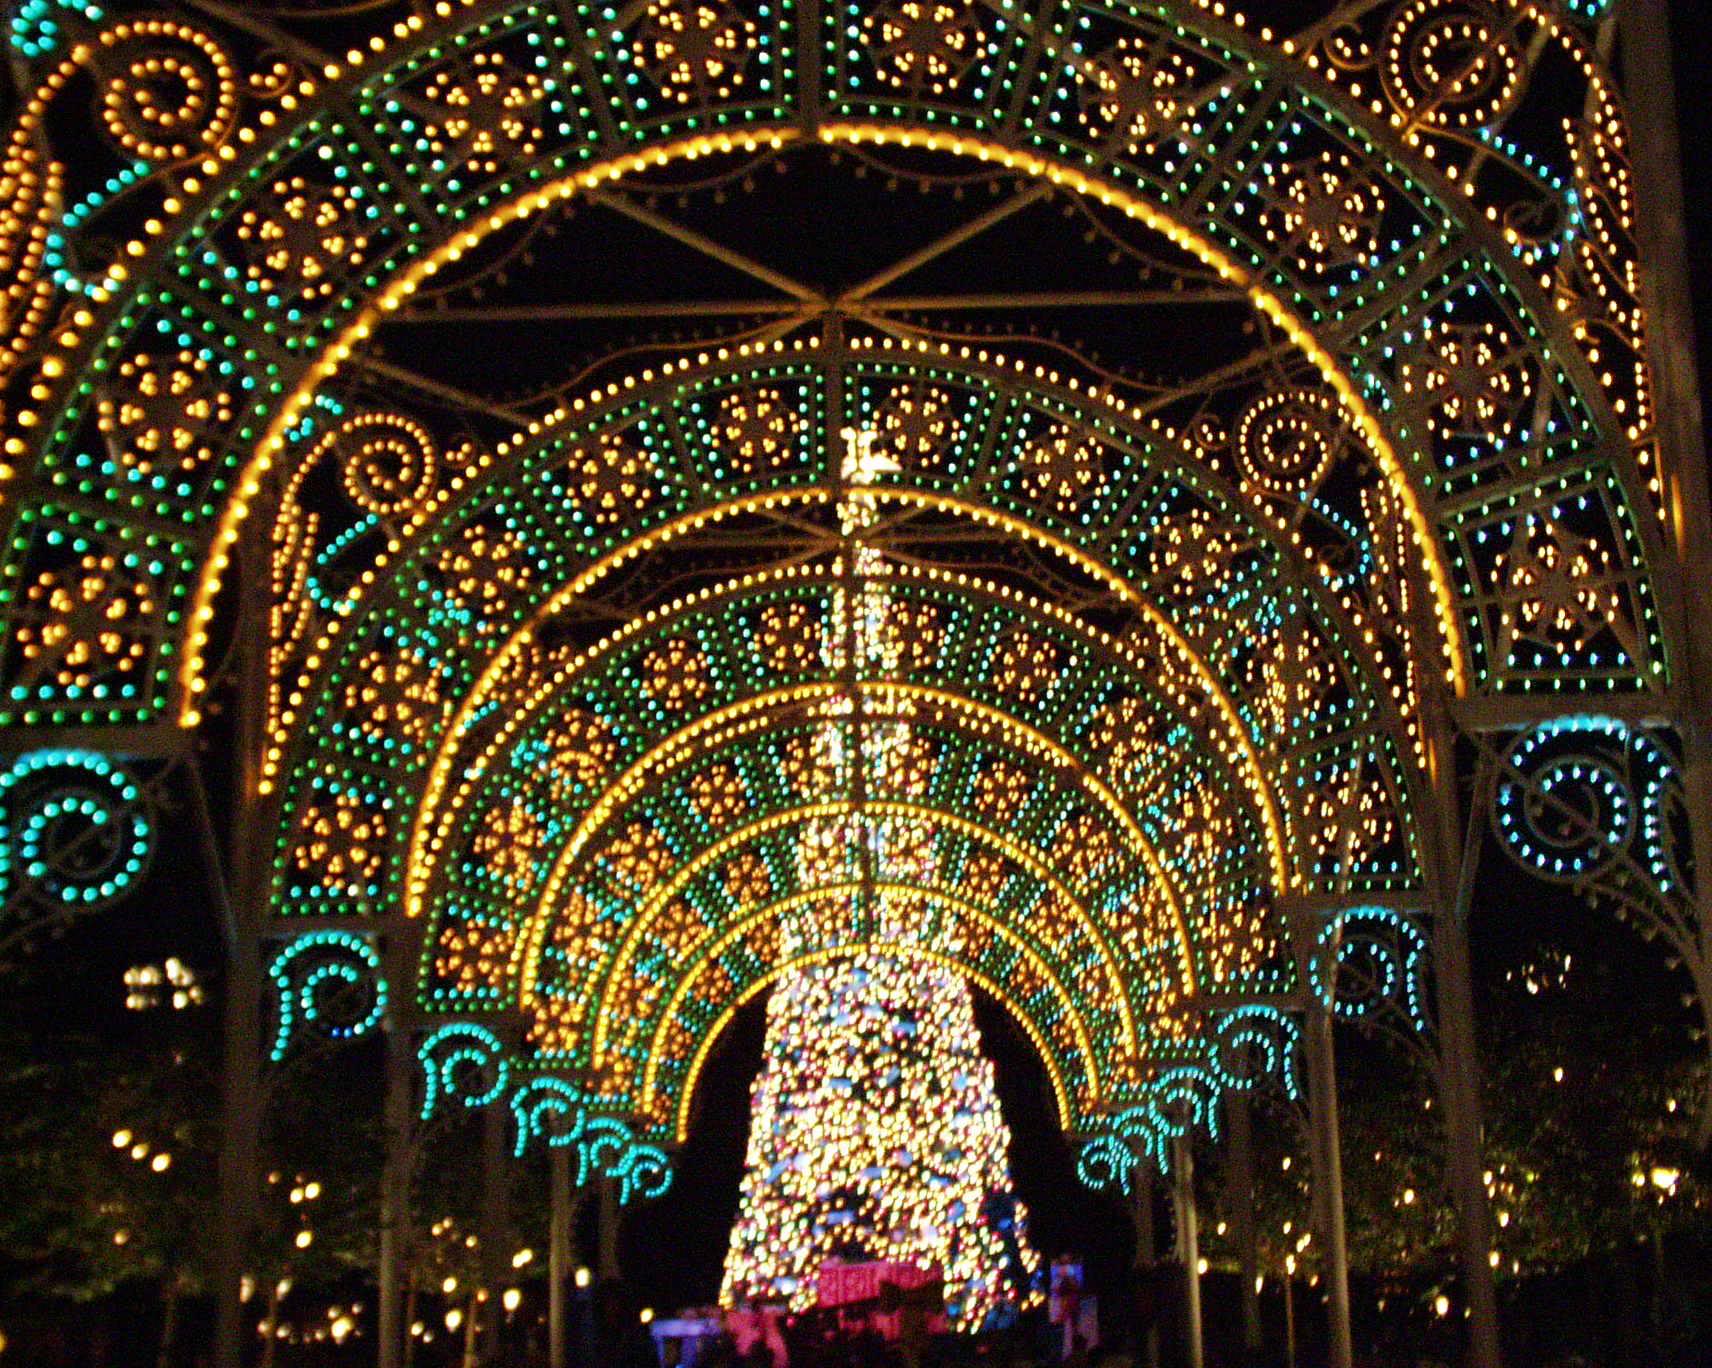 Epcots Lights of Winter retired from Disney World holiday lineup